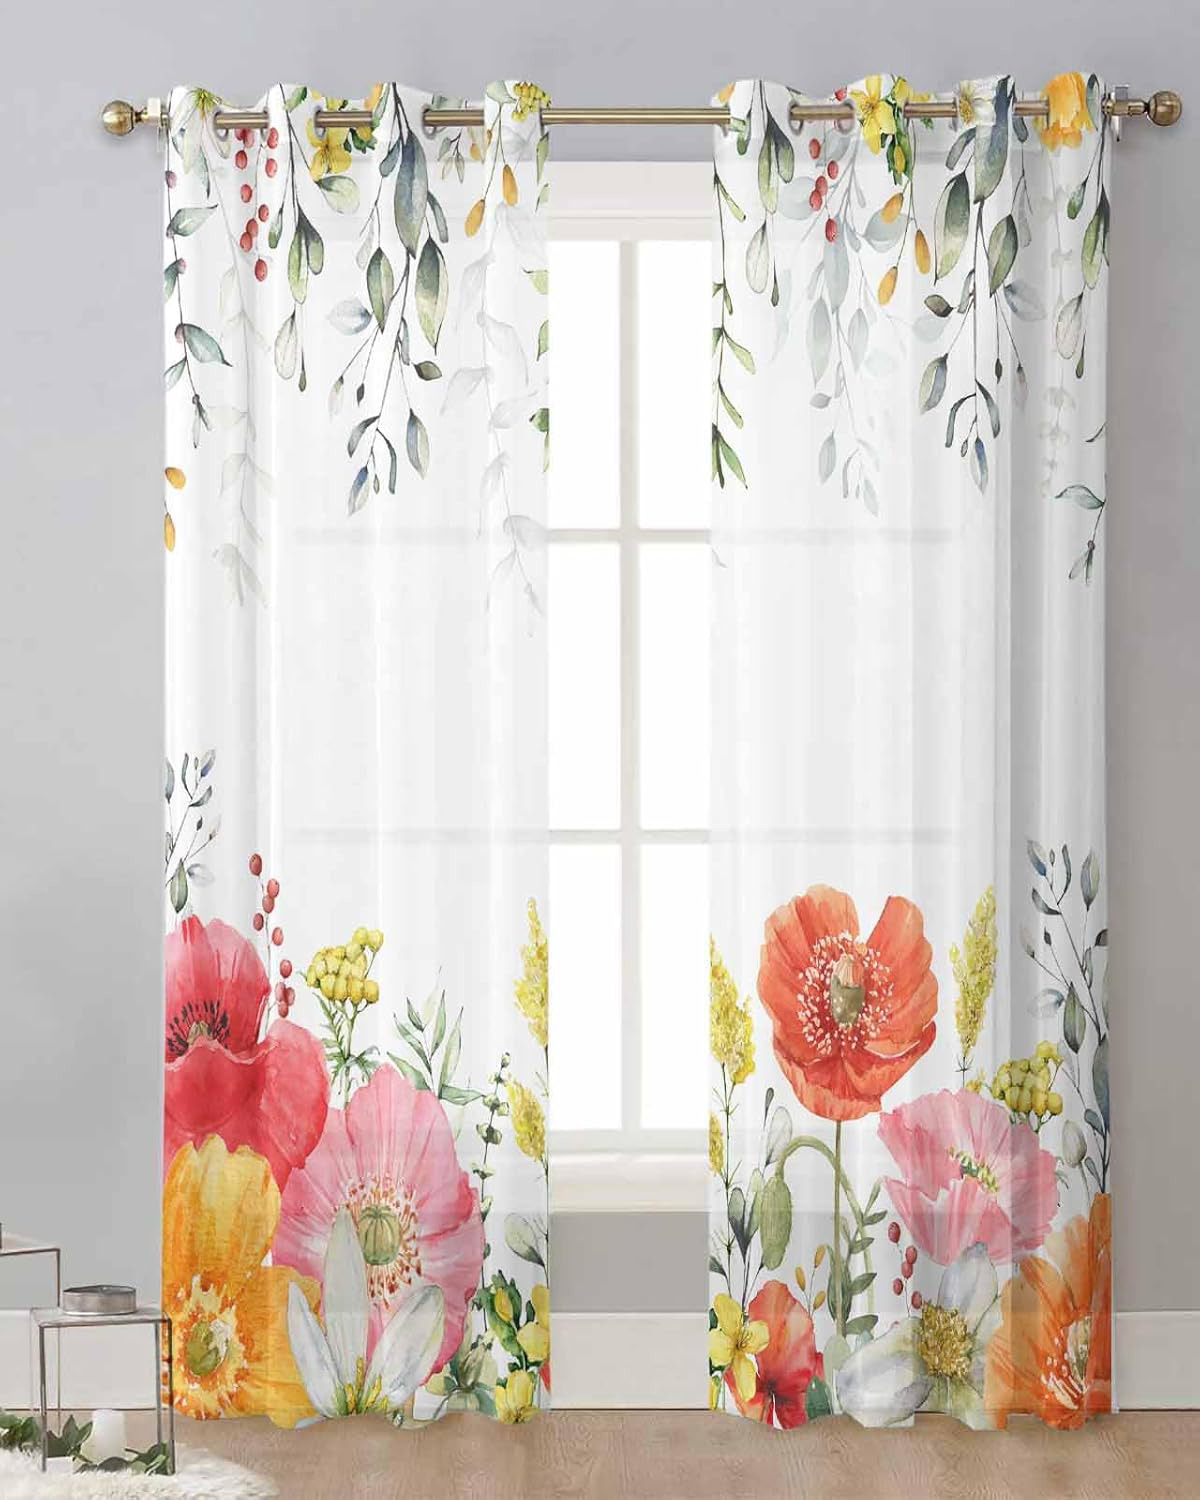 Spring Floral Sheer Curtains 84 Inches Long 2 Panels Set Spring Wildflowers for